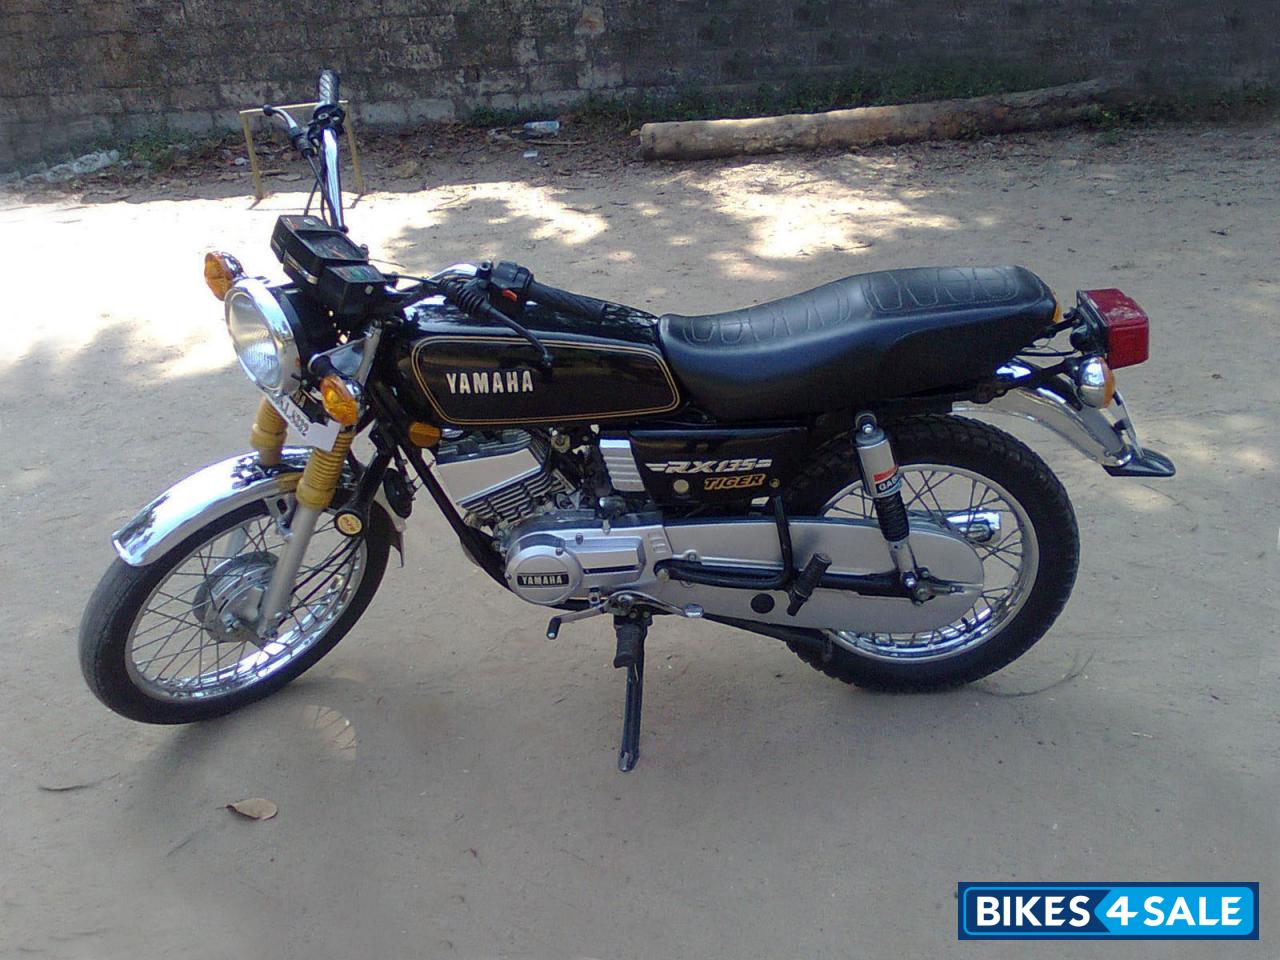 Used 1988 model Yamaha RX 135 for sale in Ernakulam. ID ...